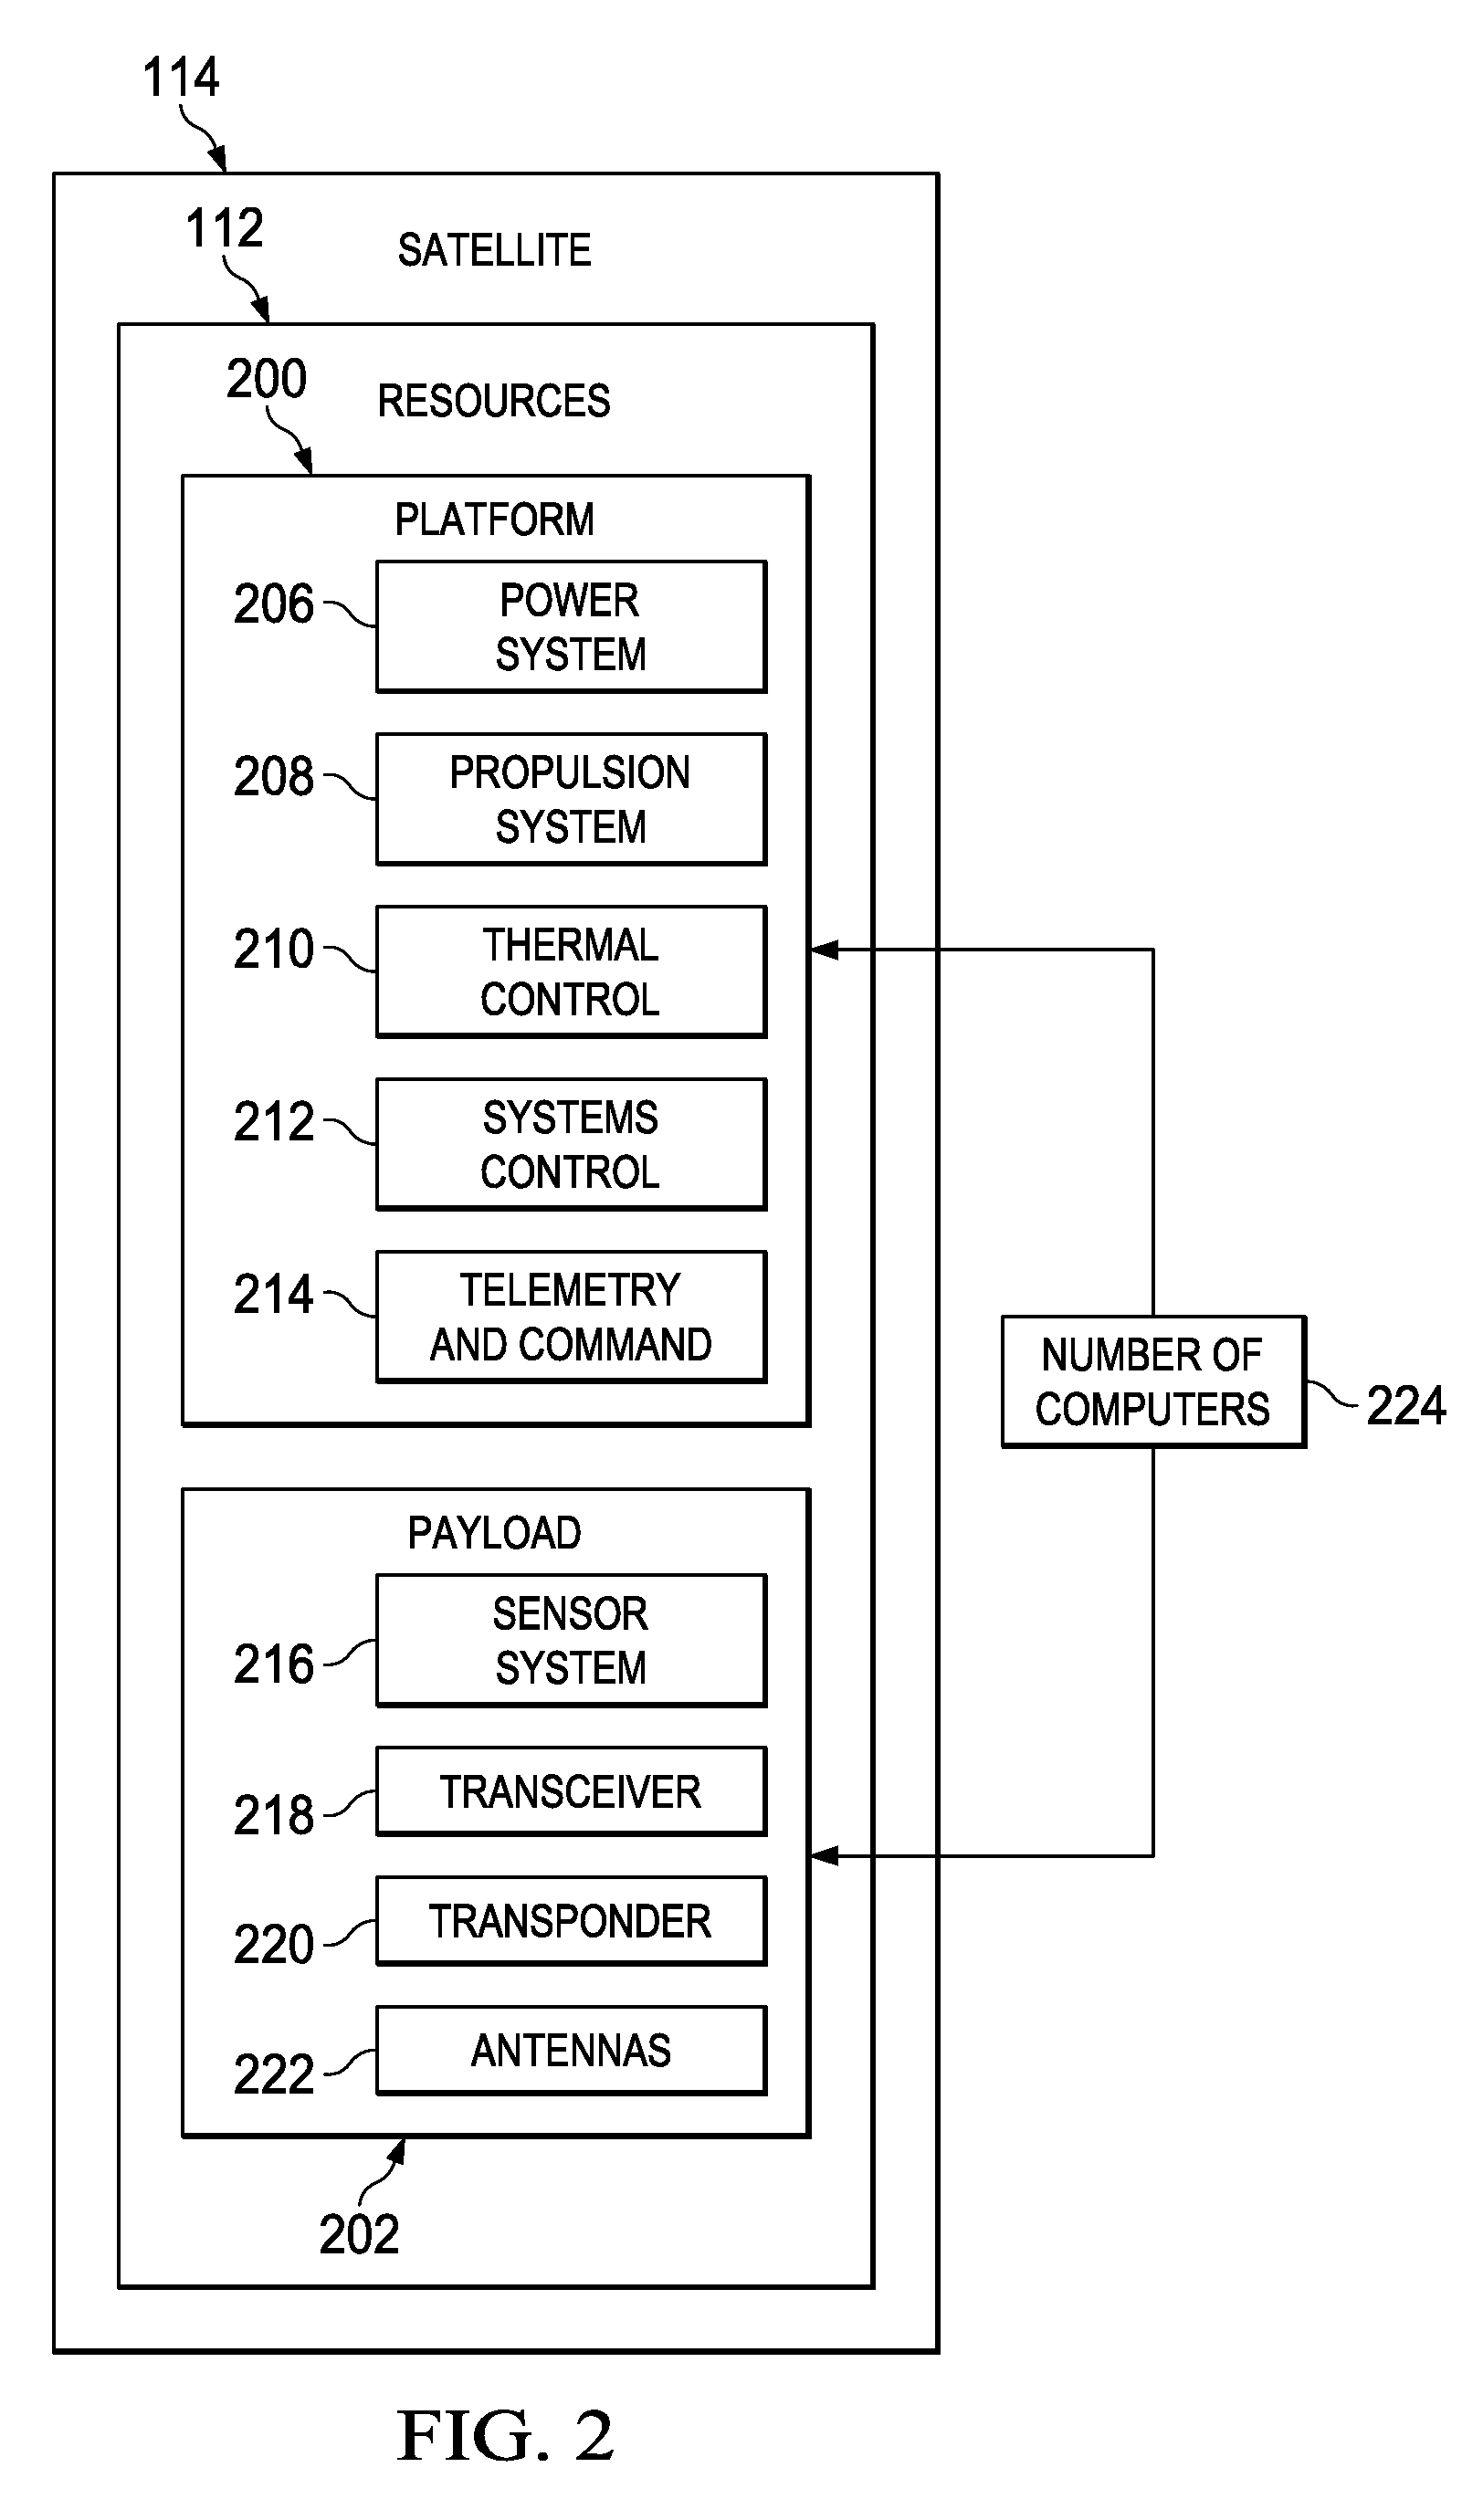 Multi-operator system for accessing satellite resources